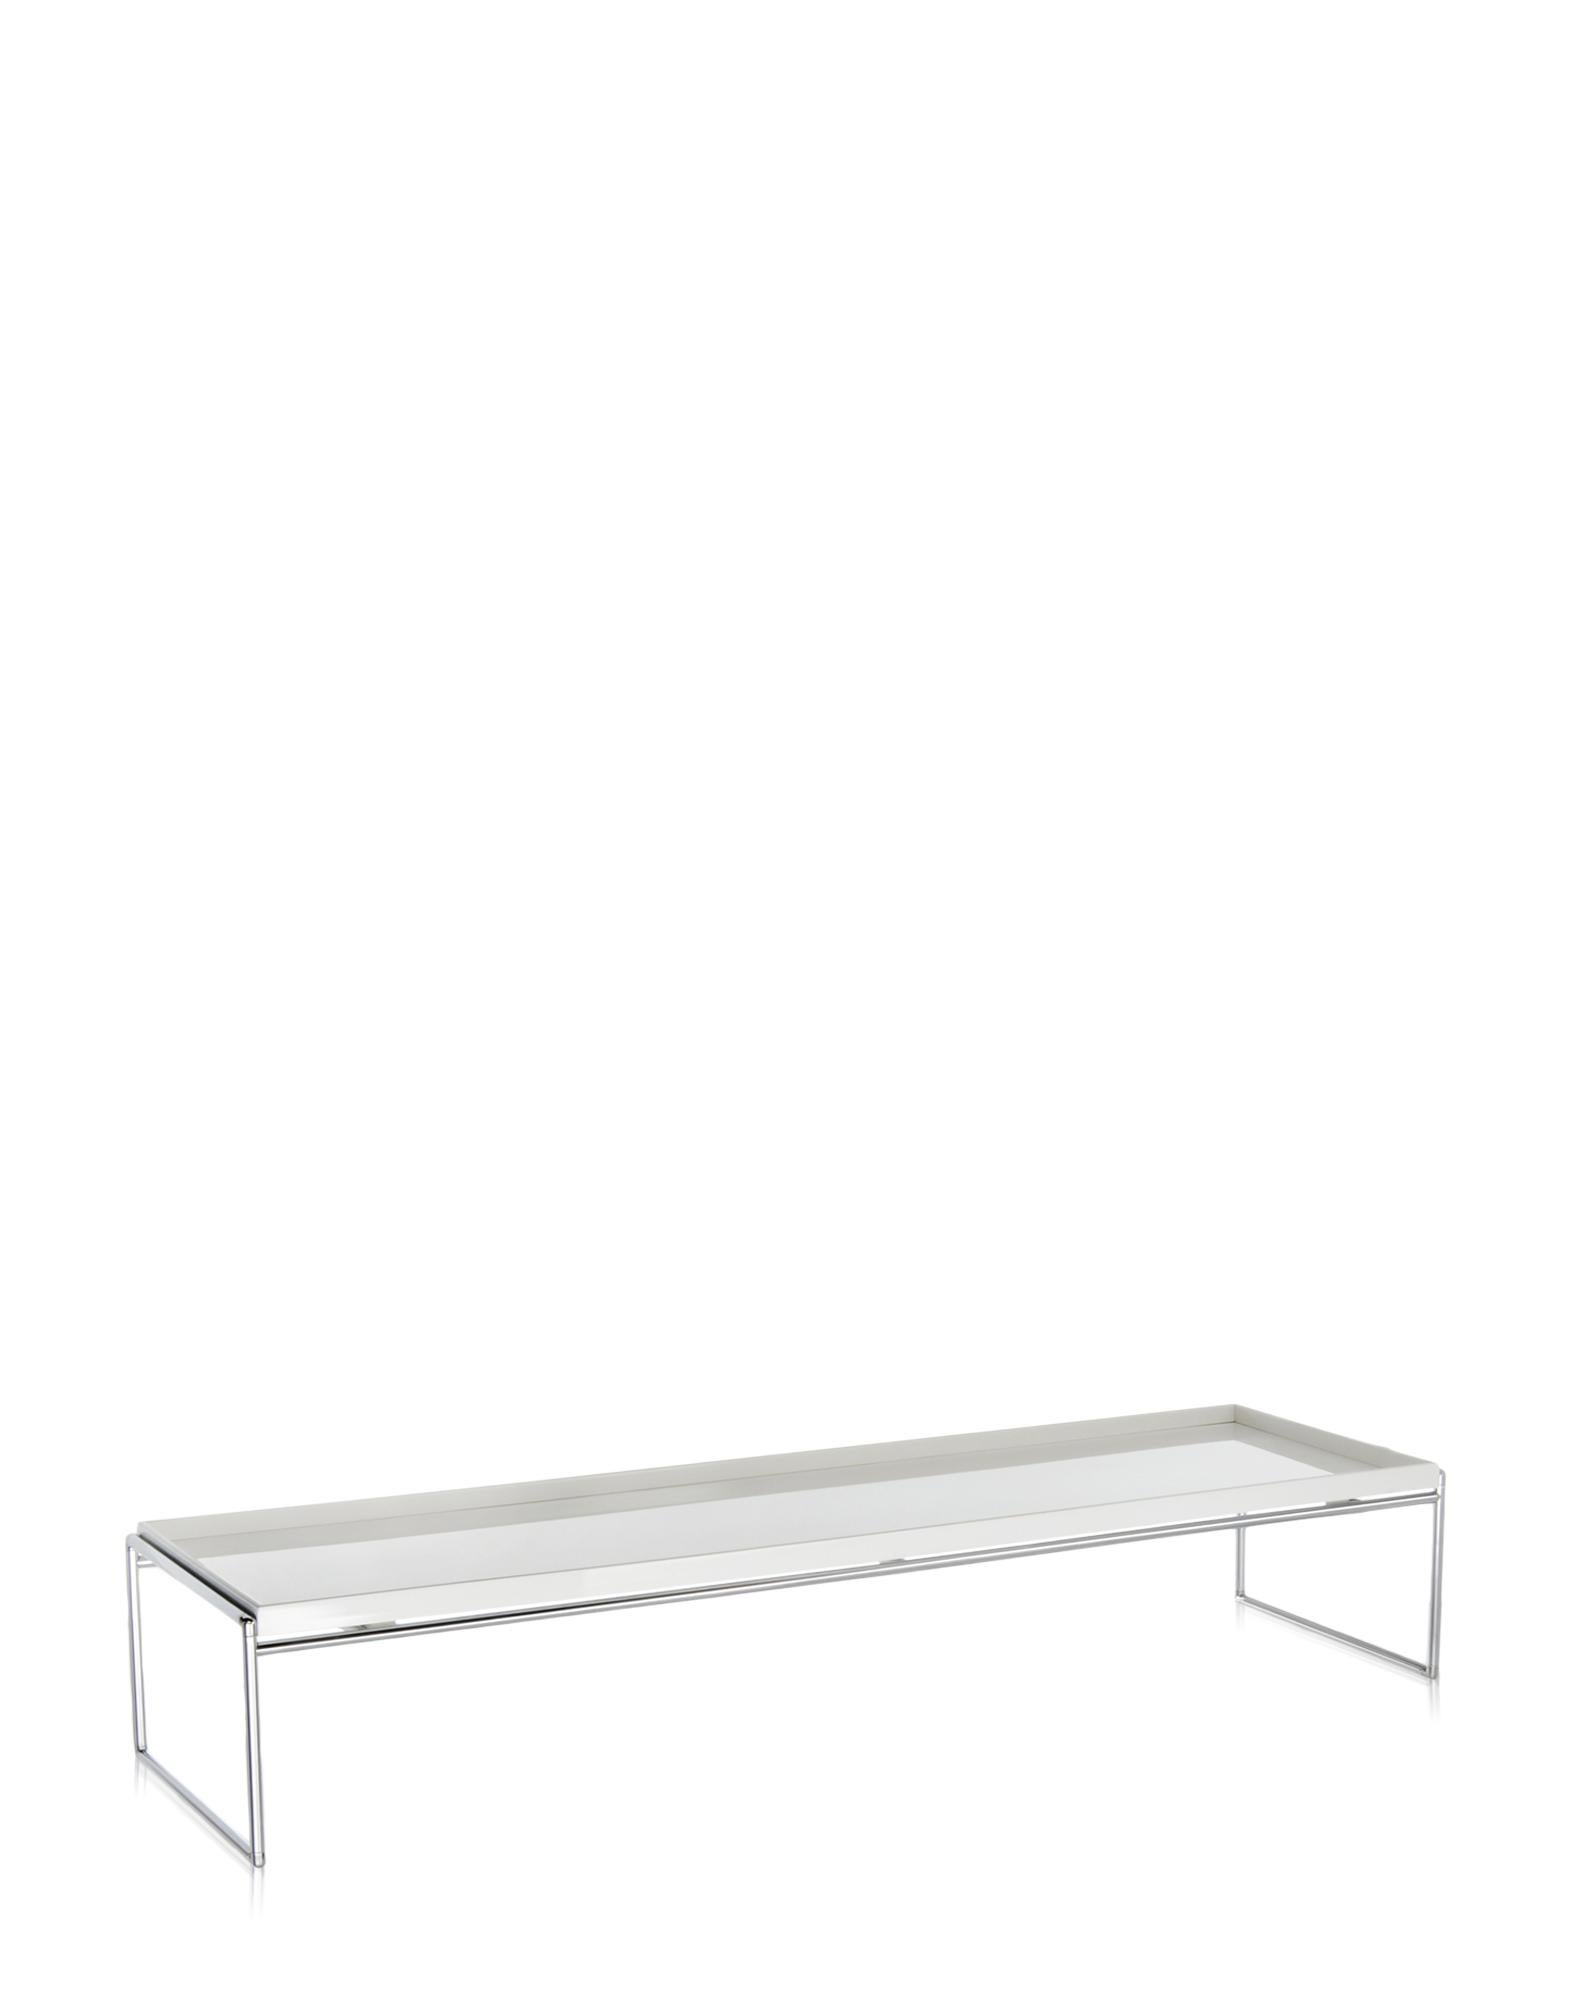 Italian Kartell Tray Table by Piero Lissoni For Sale